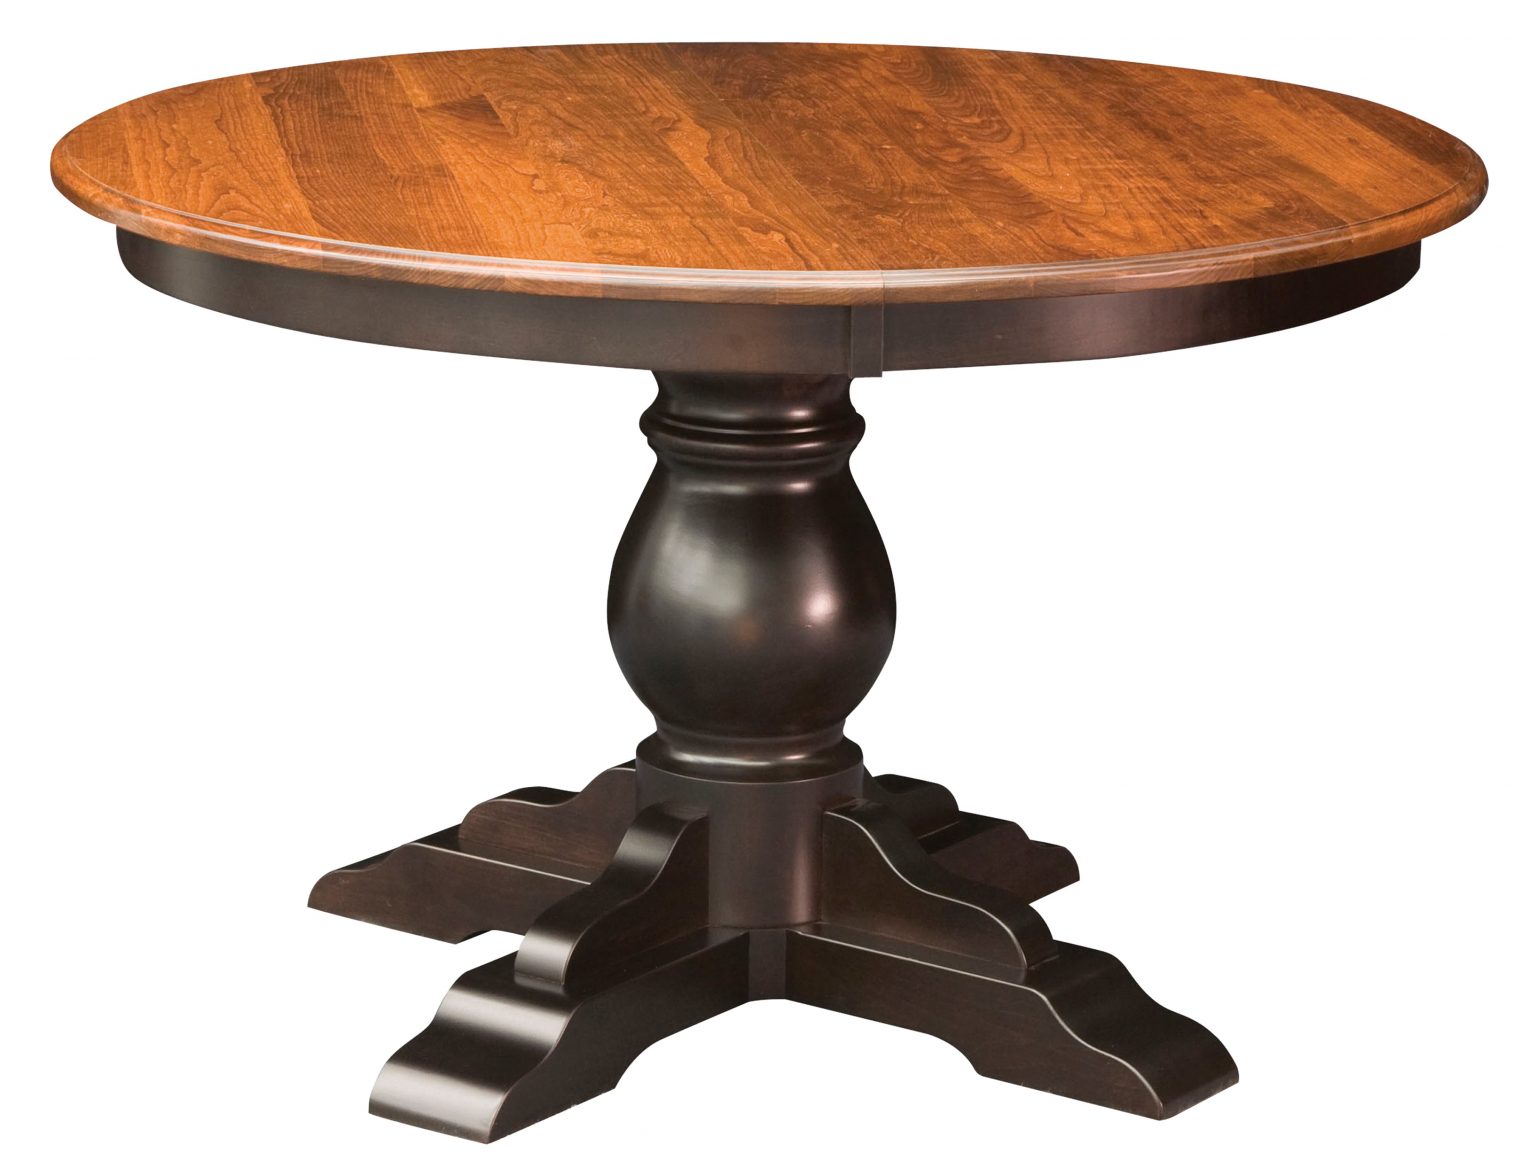 Round Oak Dining Room Pedistal Table Assembly Instructions